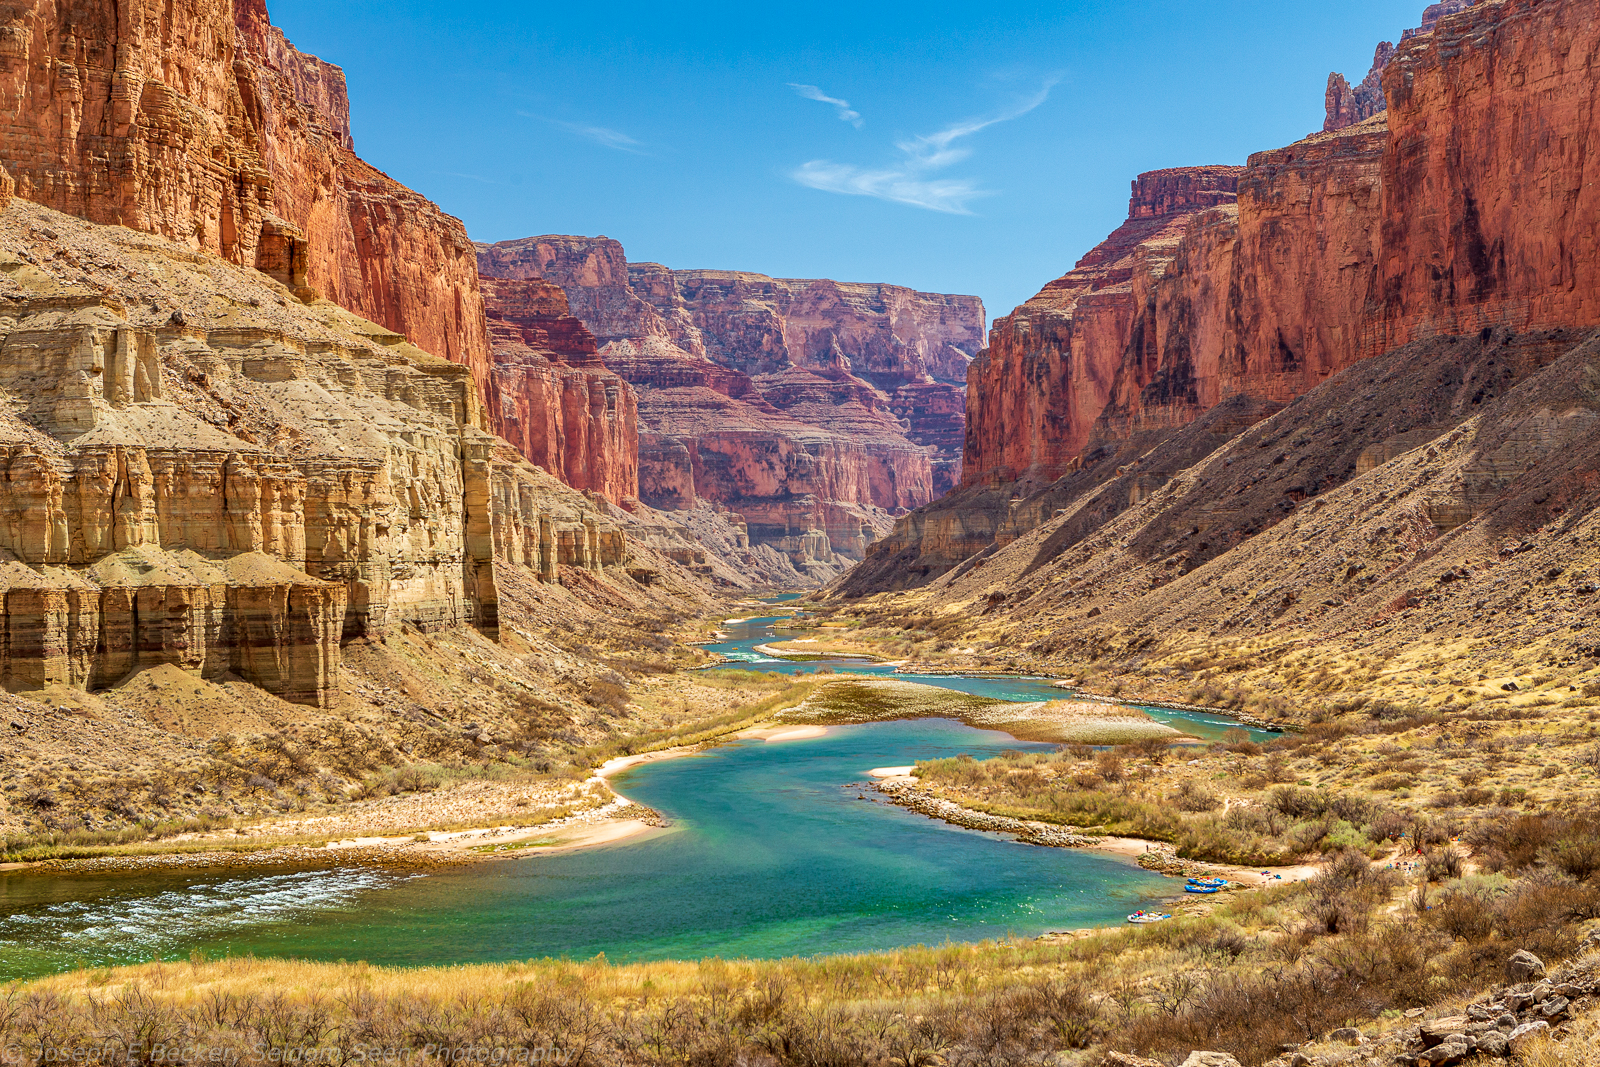 Photographer’s Guide to Rafting through the Grand Canyon, Part 1 – Overview